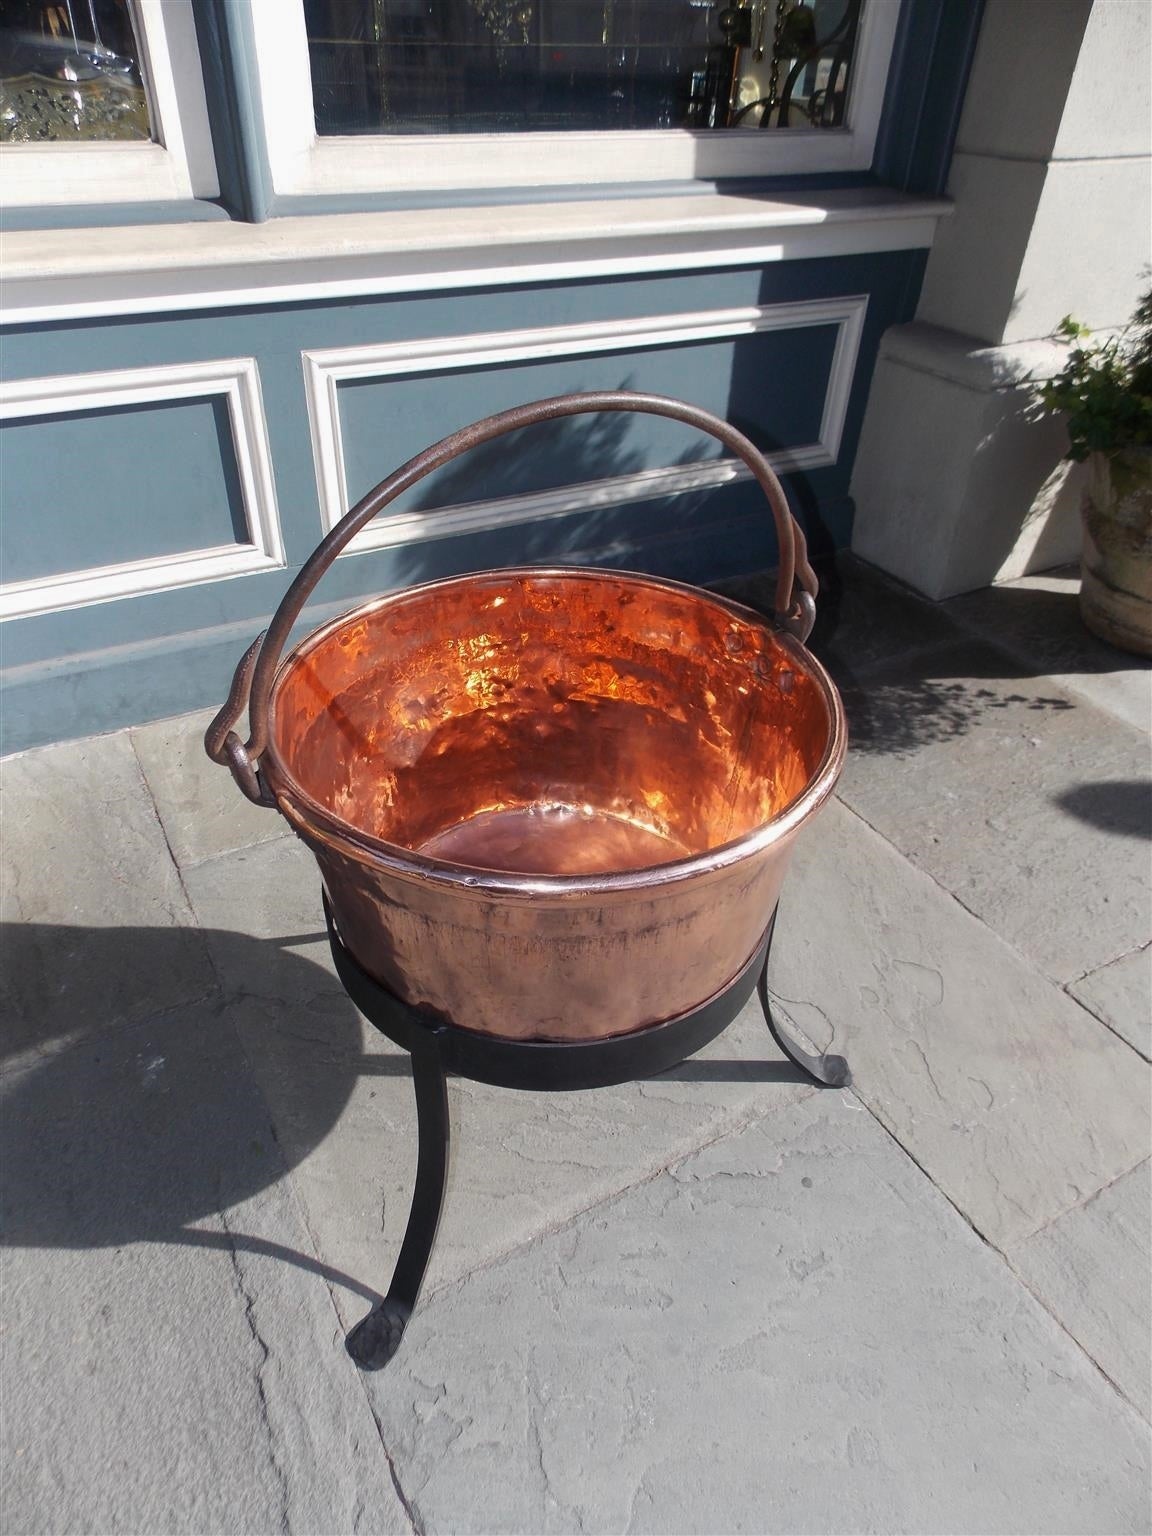 Late 18th Century American Copper and Wrought Iron Plantation Cauldron on Stand, Circa 1780